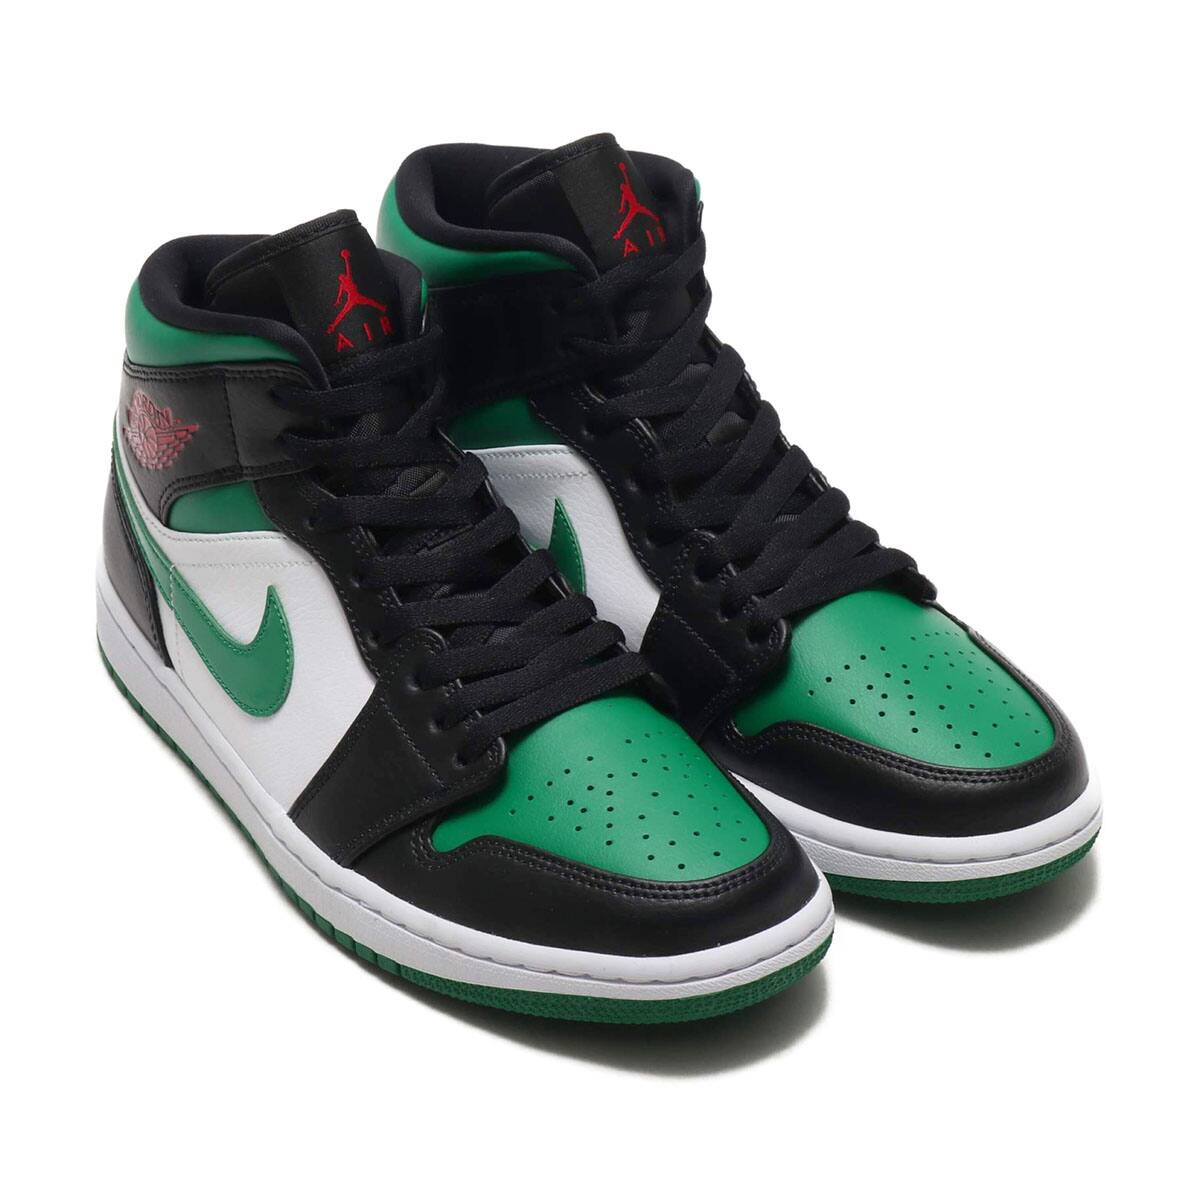 MID BLACK/PINE GREEN-WHITE-GYM RED 20SP 